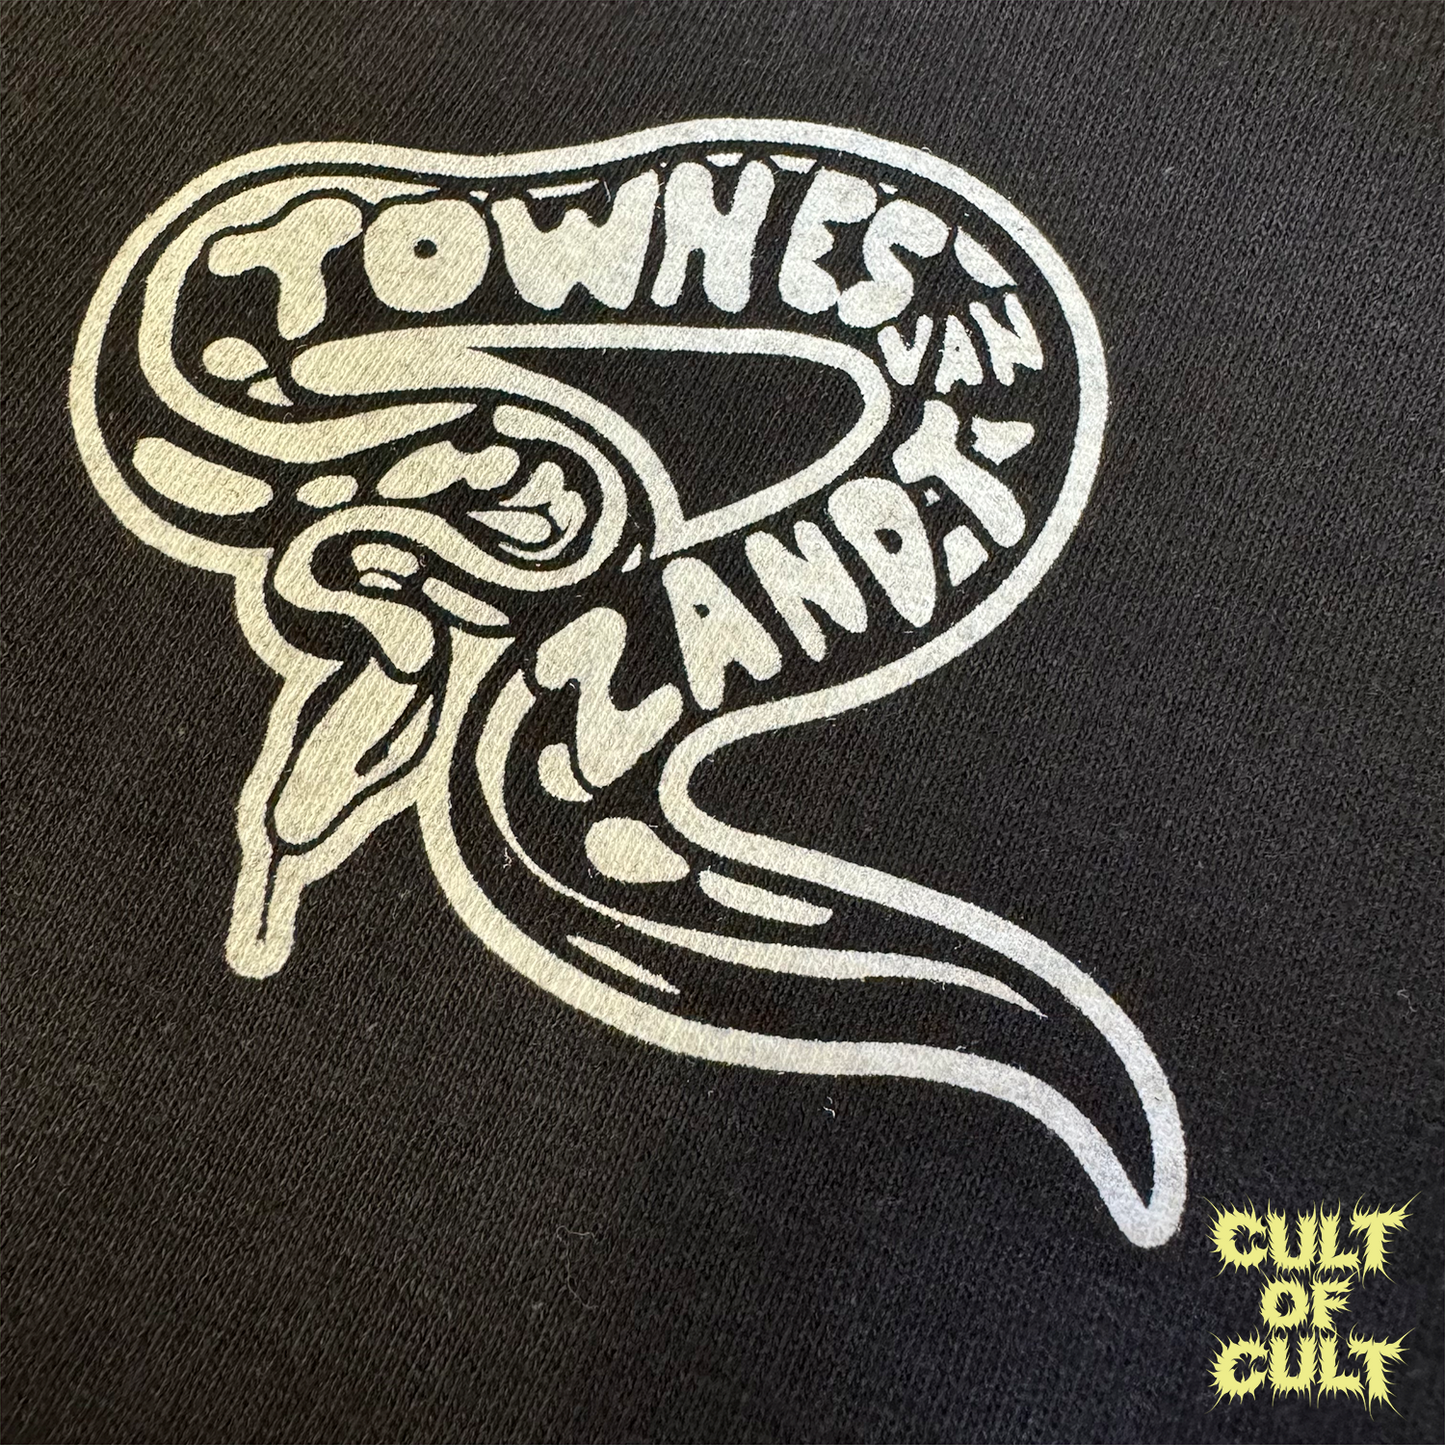 A zoomed in detail shot of the pocket print on the front of of the Townes Van Zandt short sleeve shirt